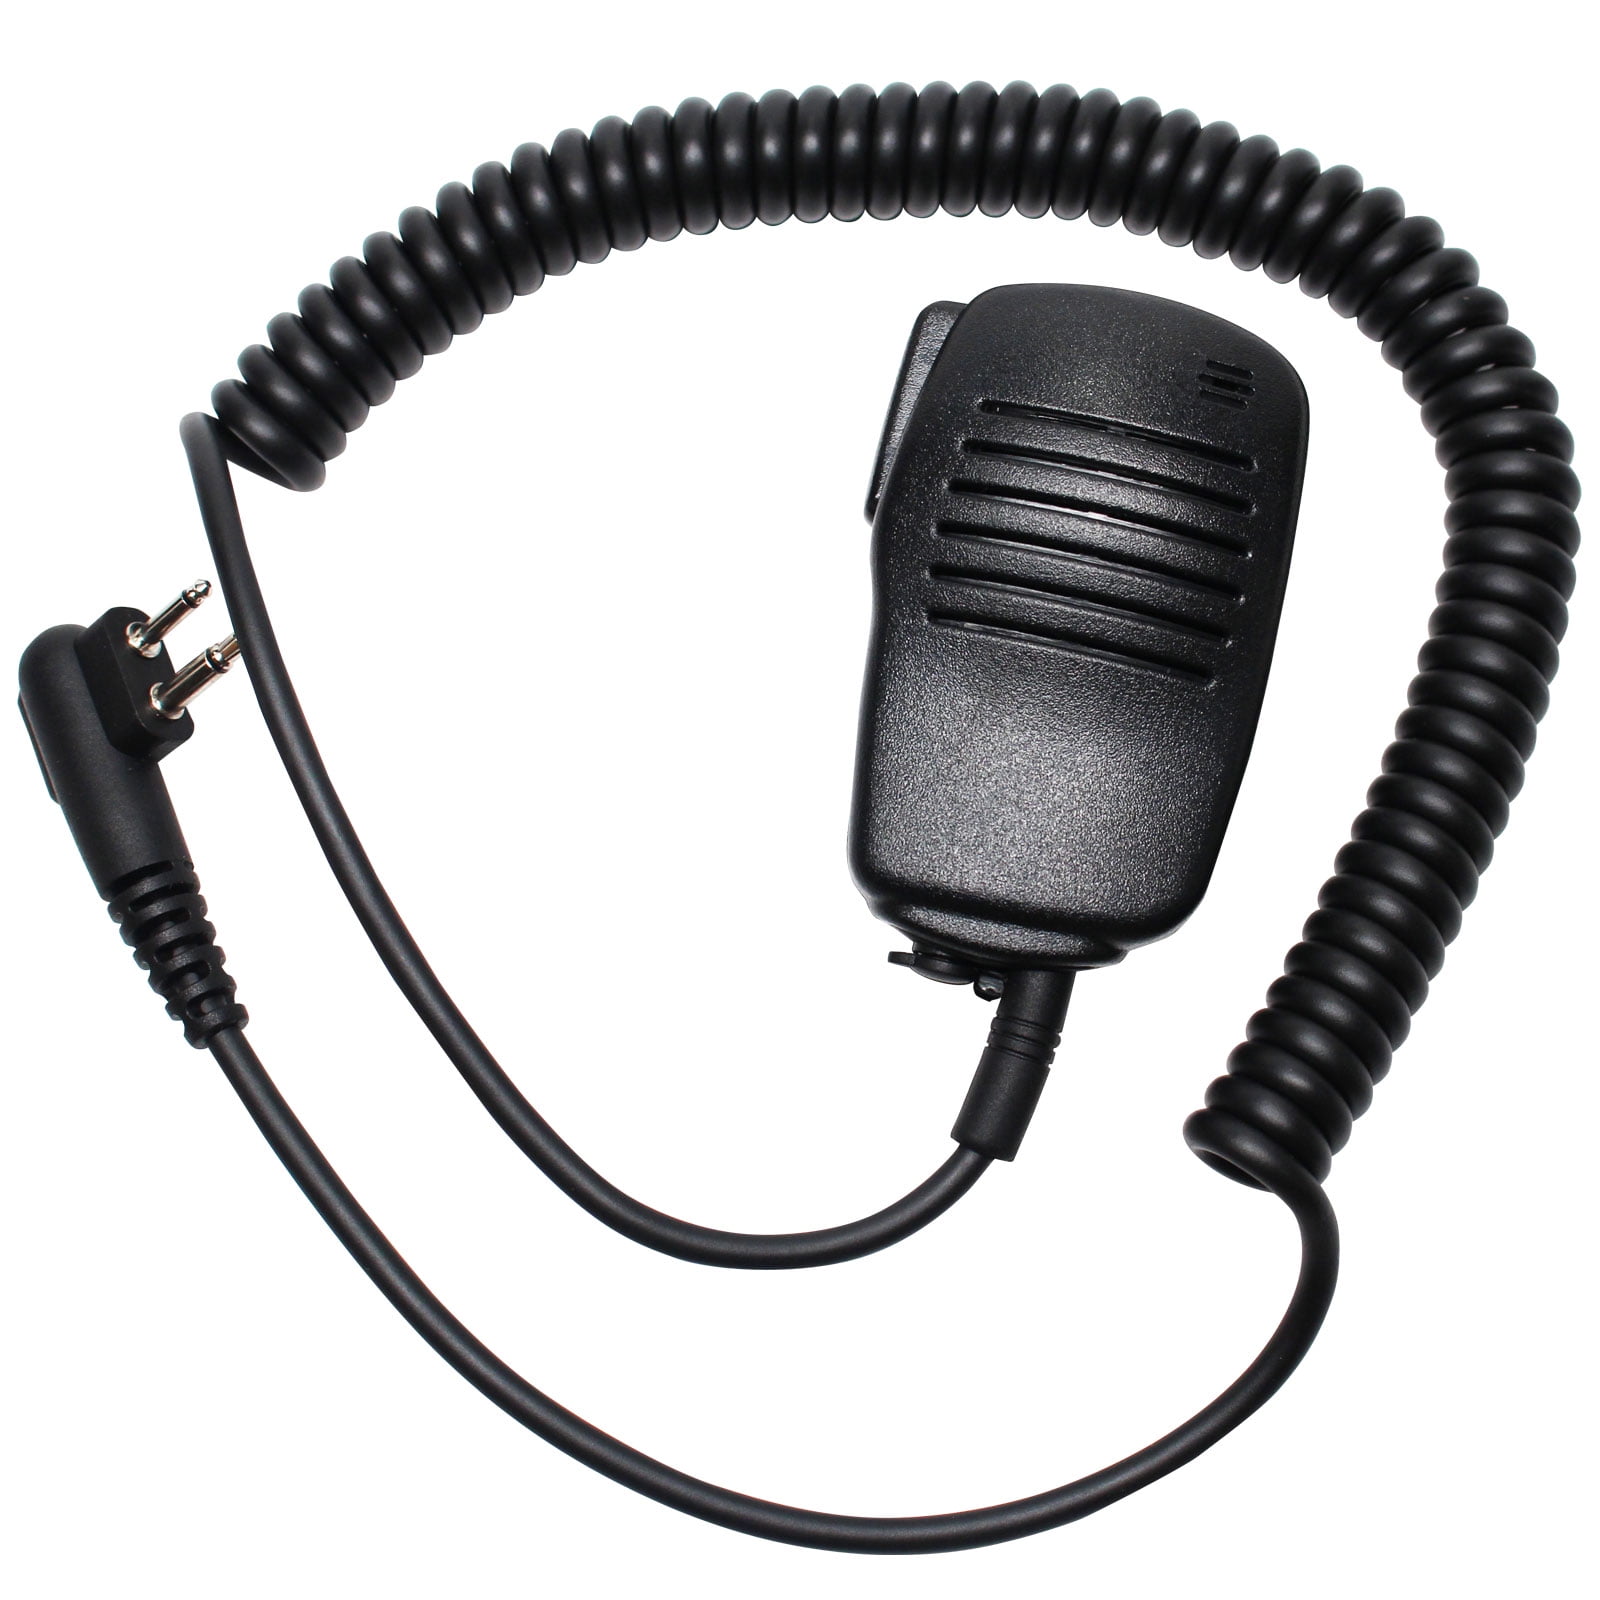 Details about   Speaker Mic with Reinforced Cable for Motorola Radios CP200D CP200 CP200XLS CP18 